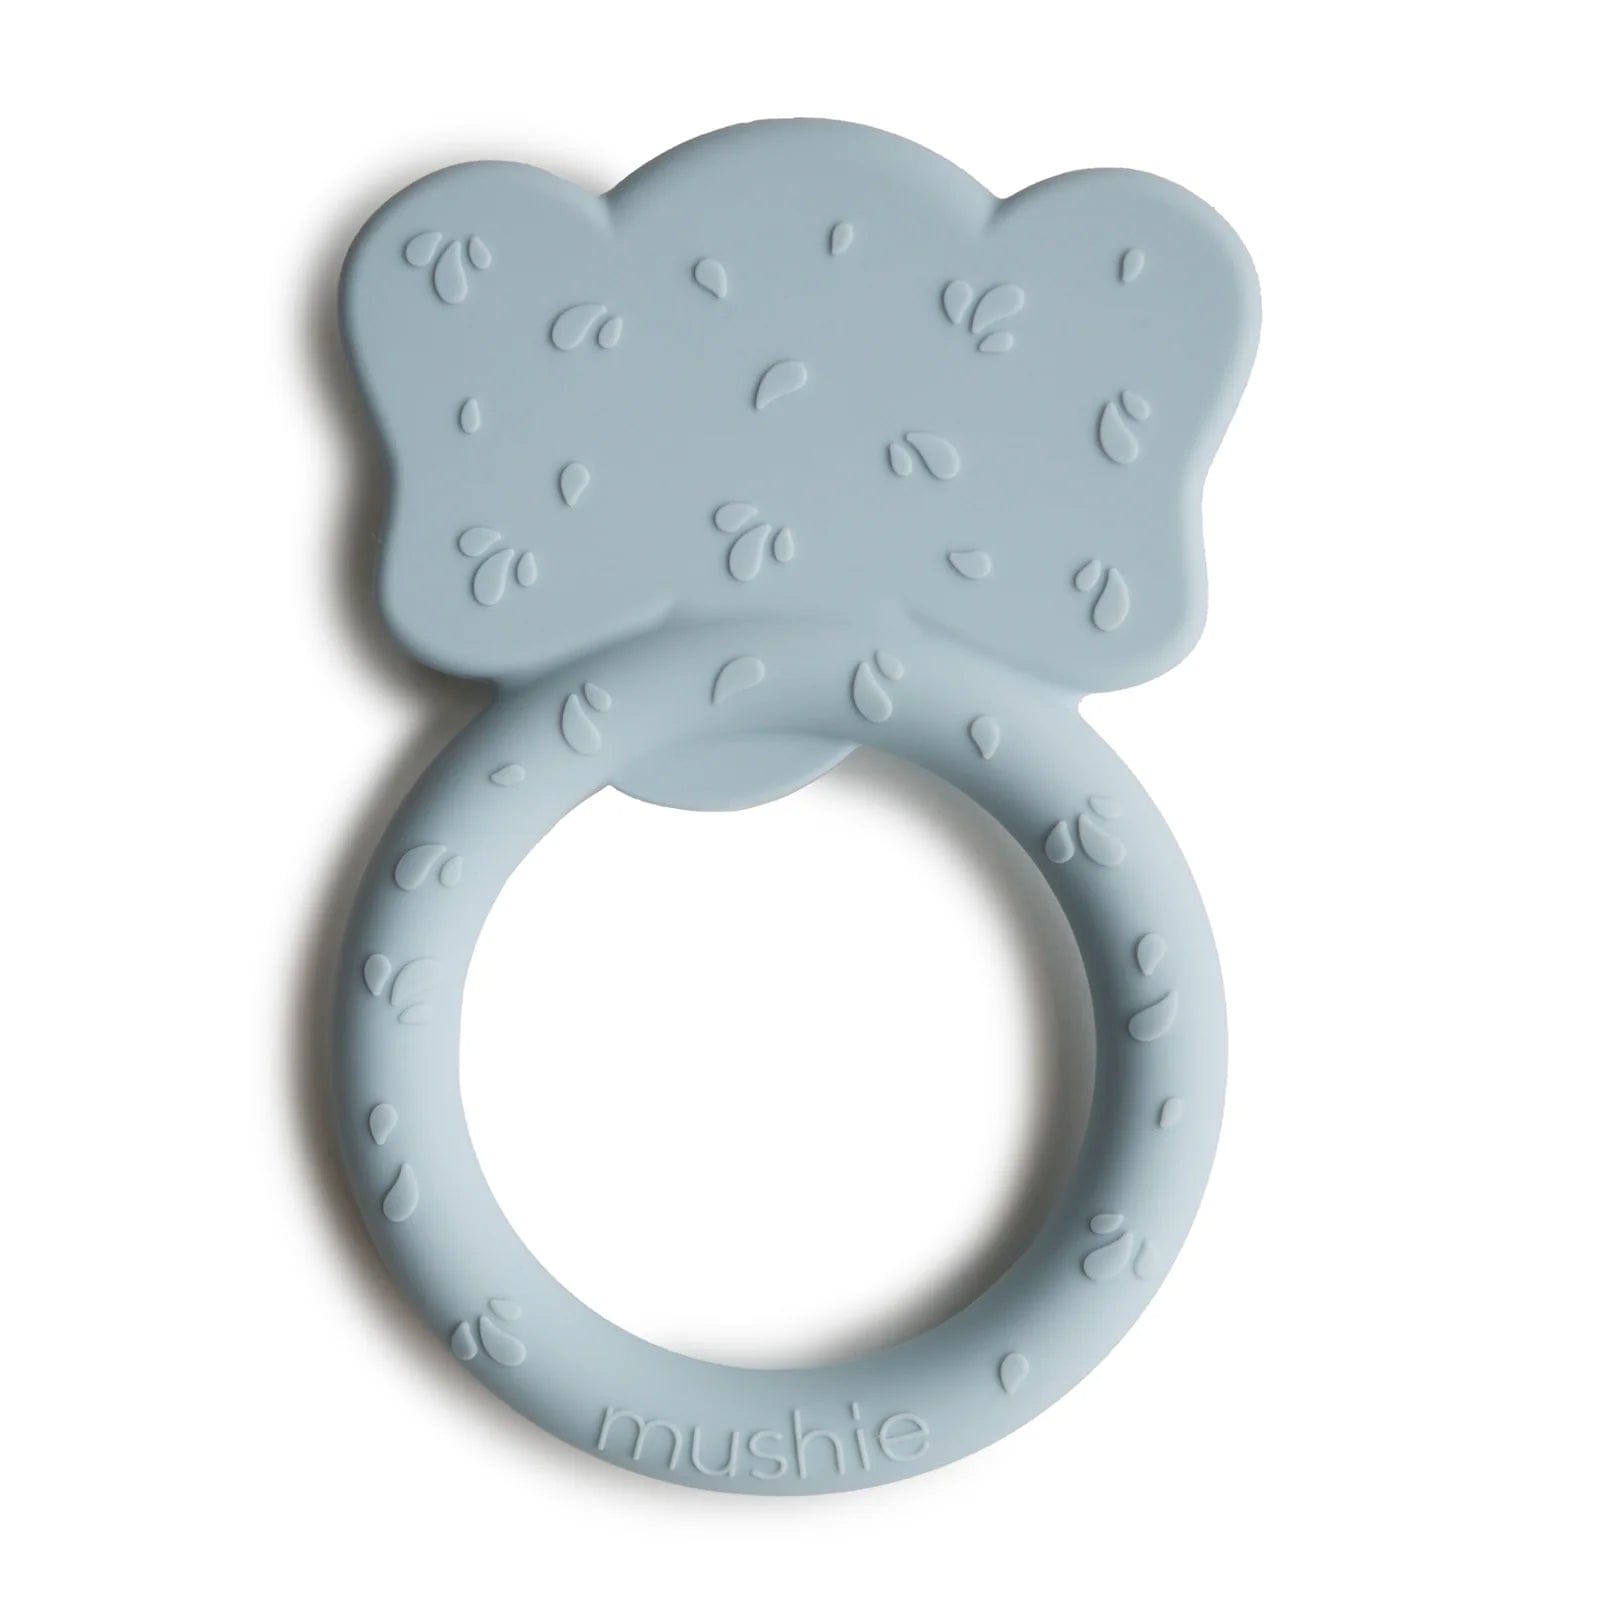 Mushie Soother (Cloud) Mushie Elephant Teether (Cloud)